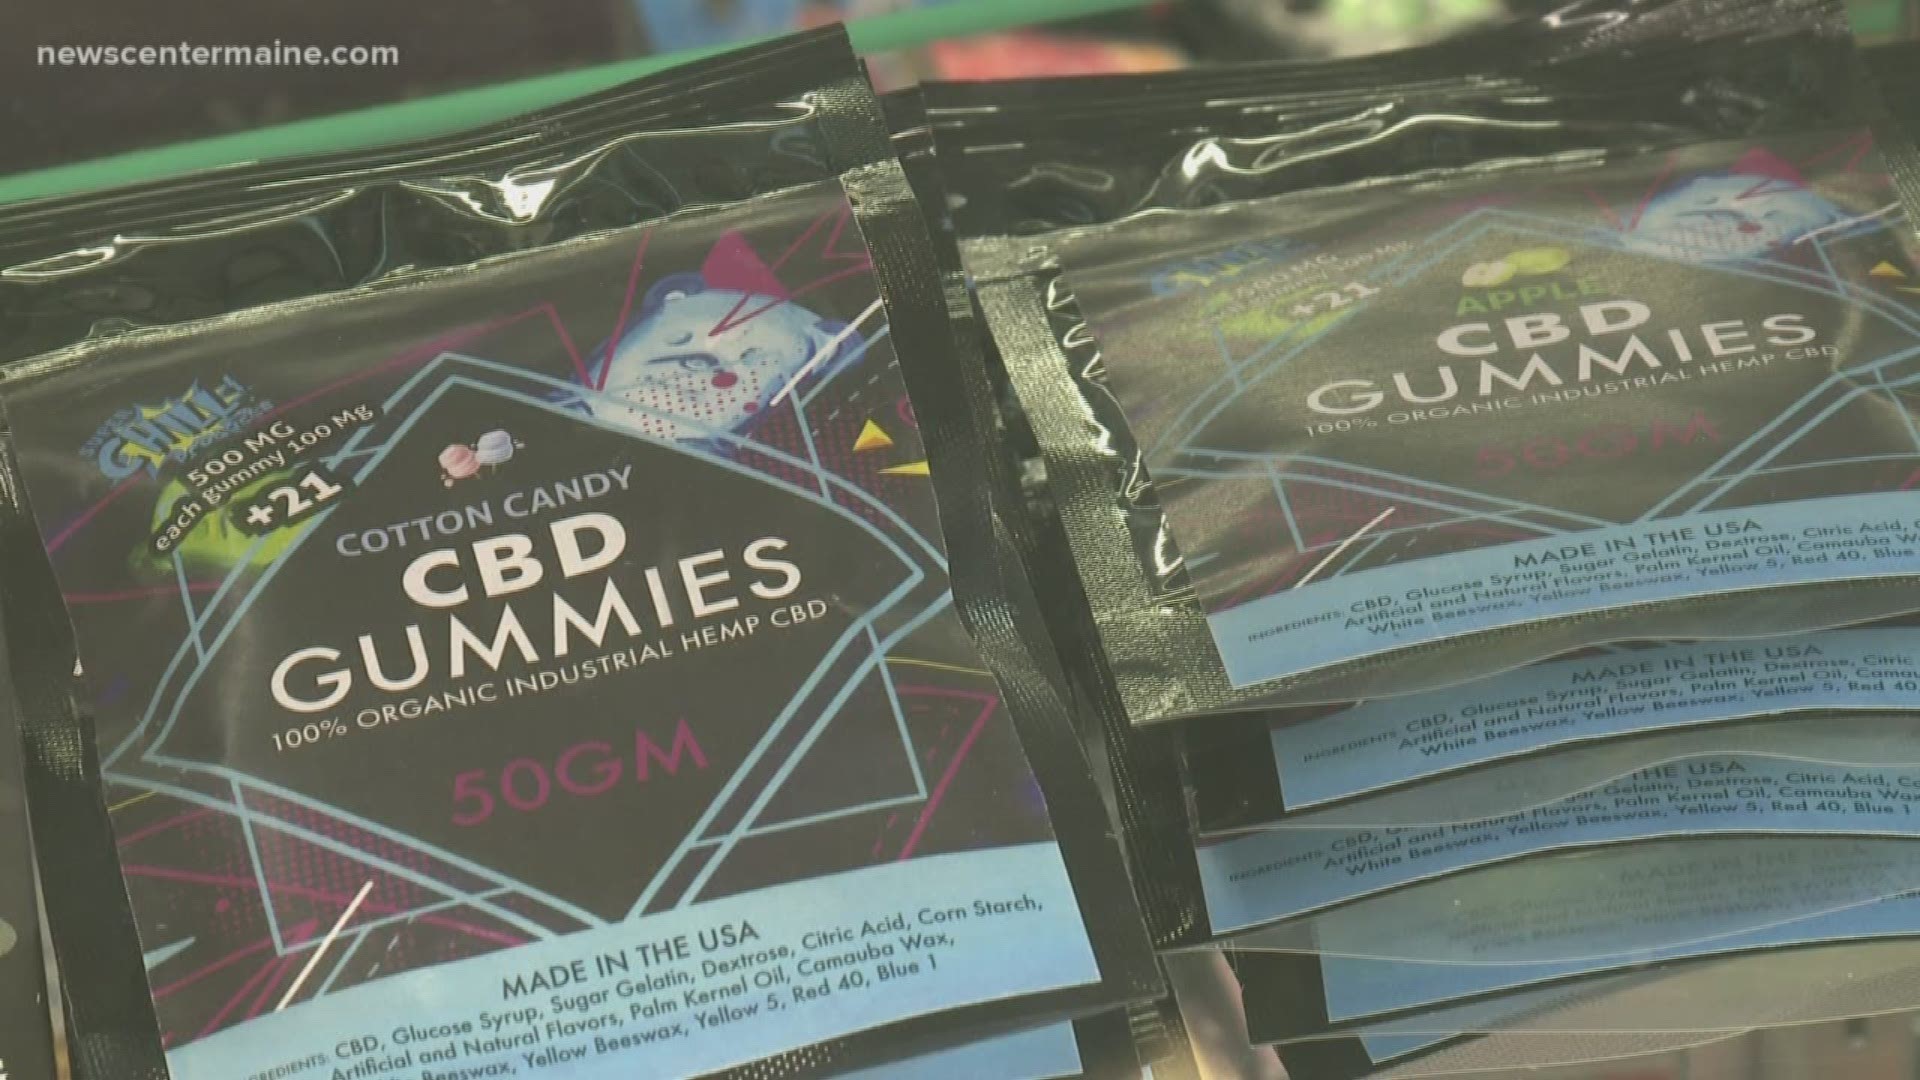 Customers in Sanford must be 21 years old to purchase any product containing CBD.